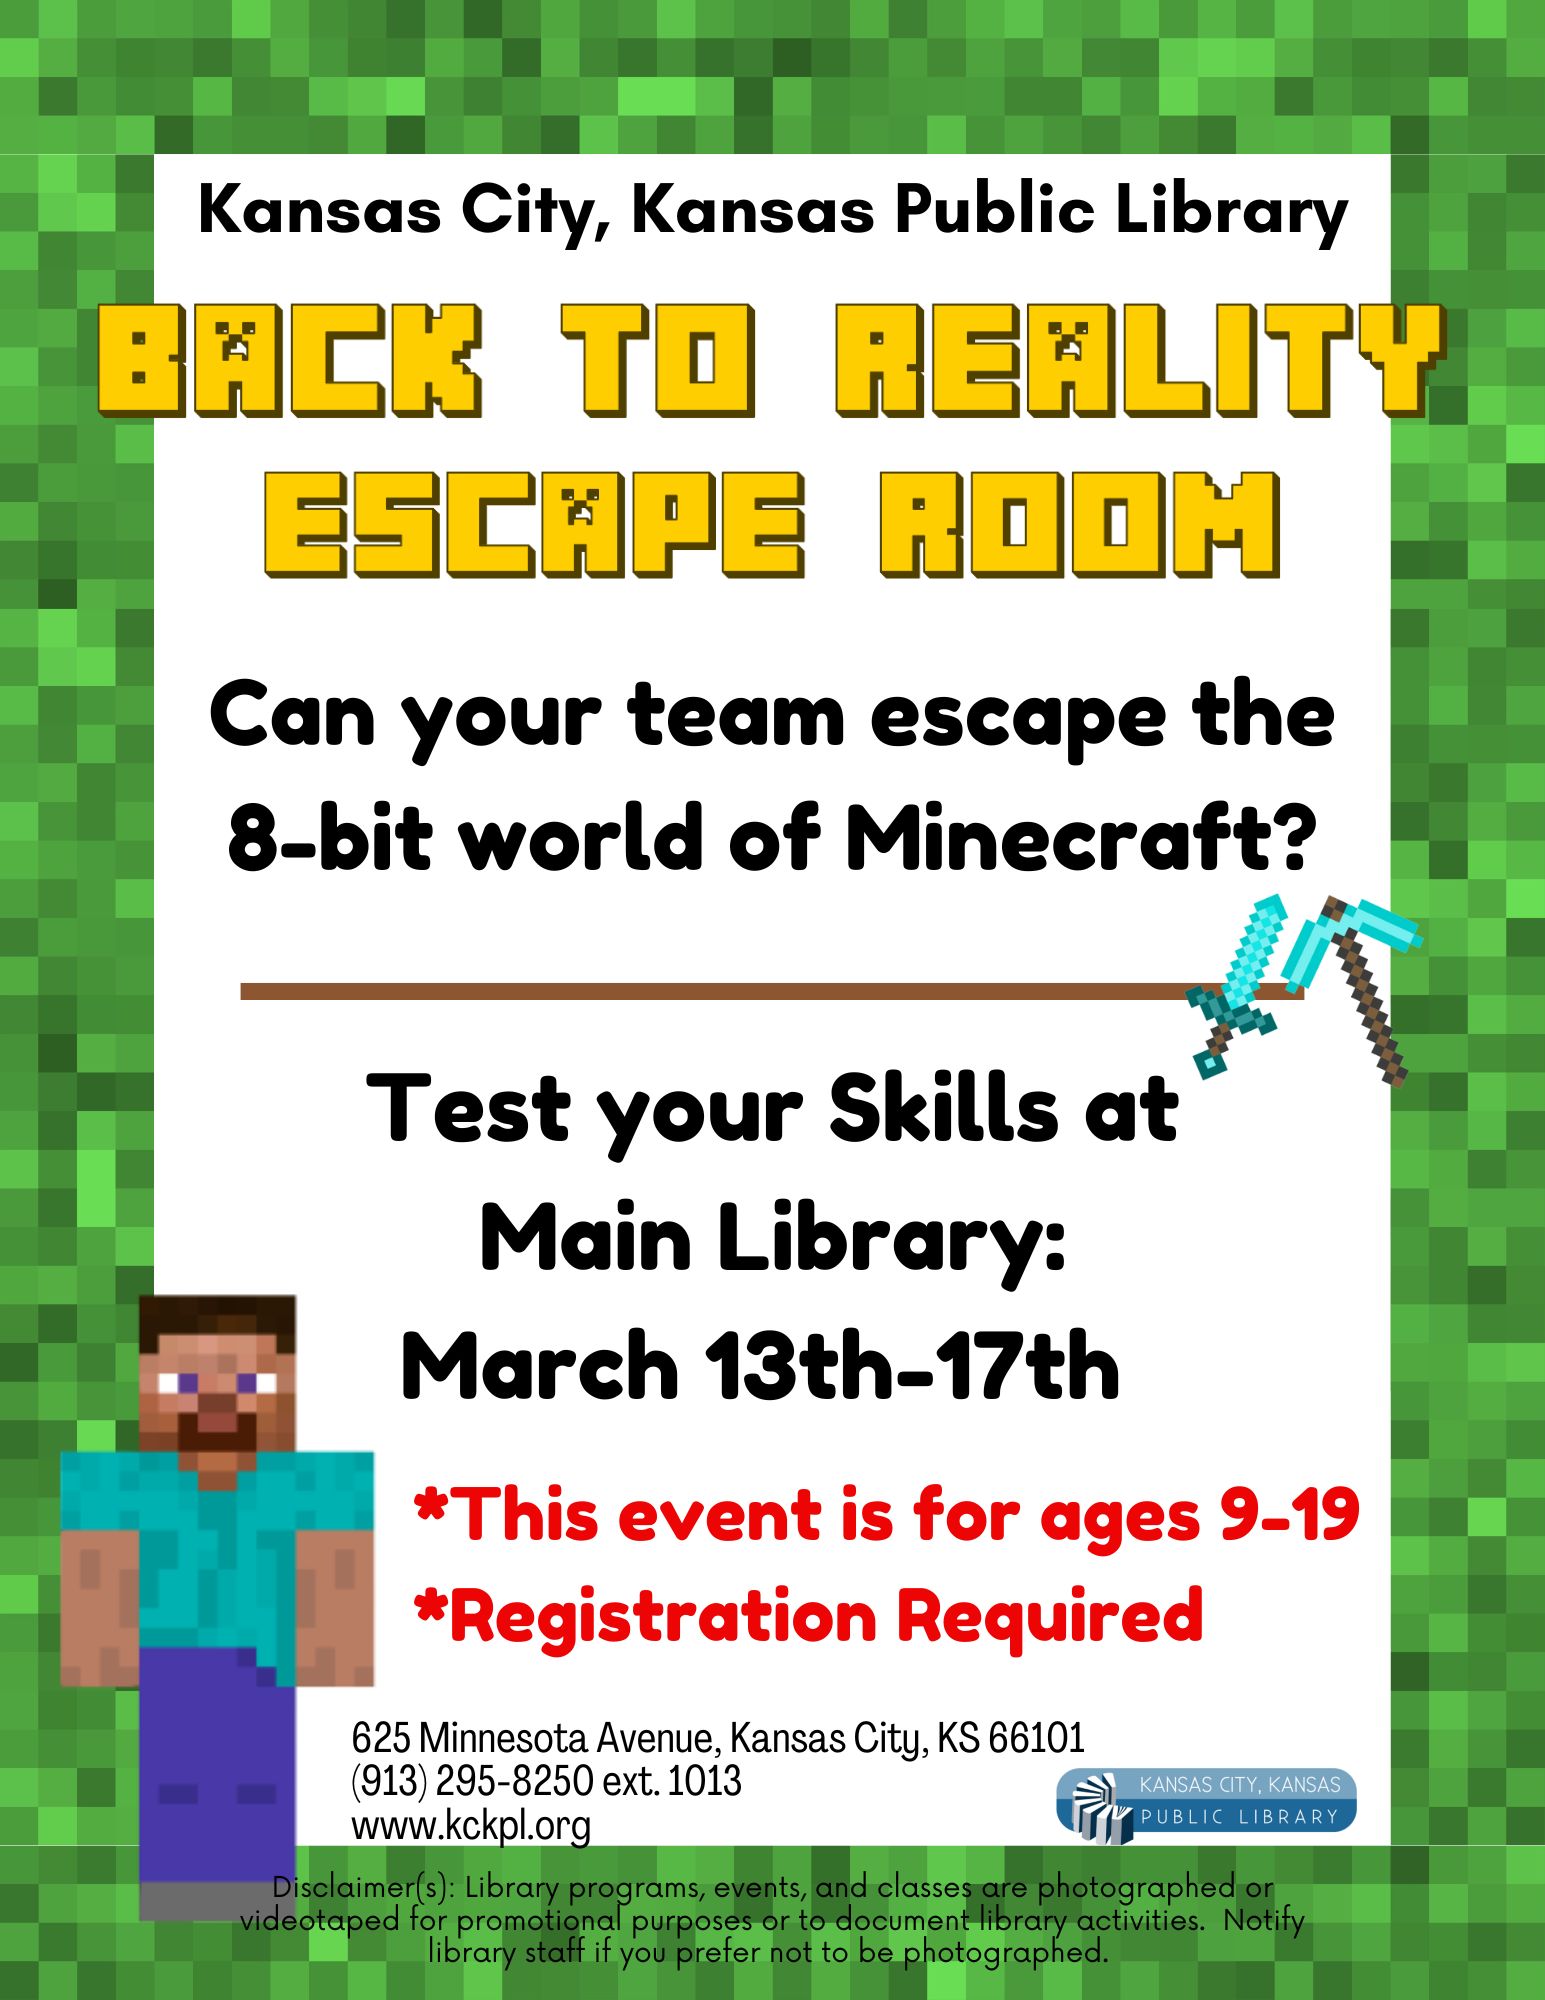 Back to reality Minecraft escape room flyer for Main Library.